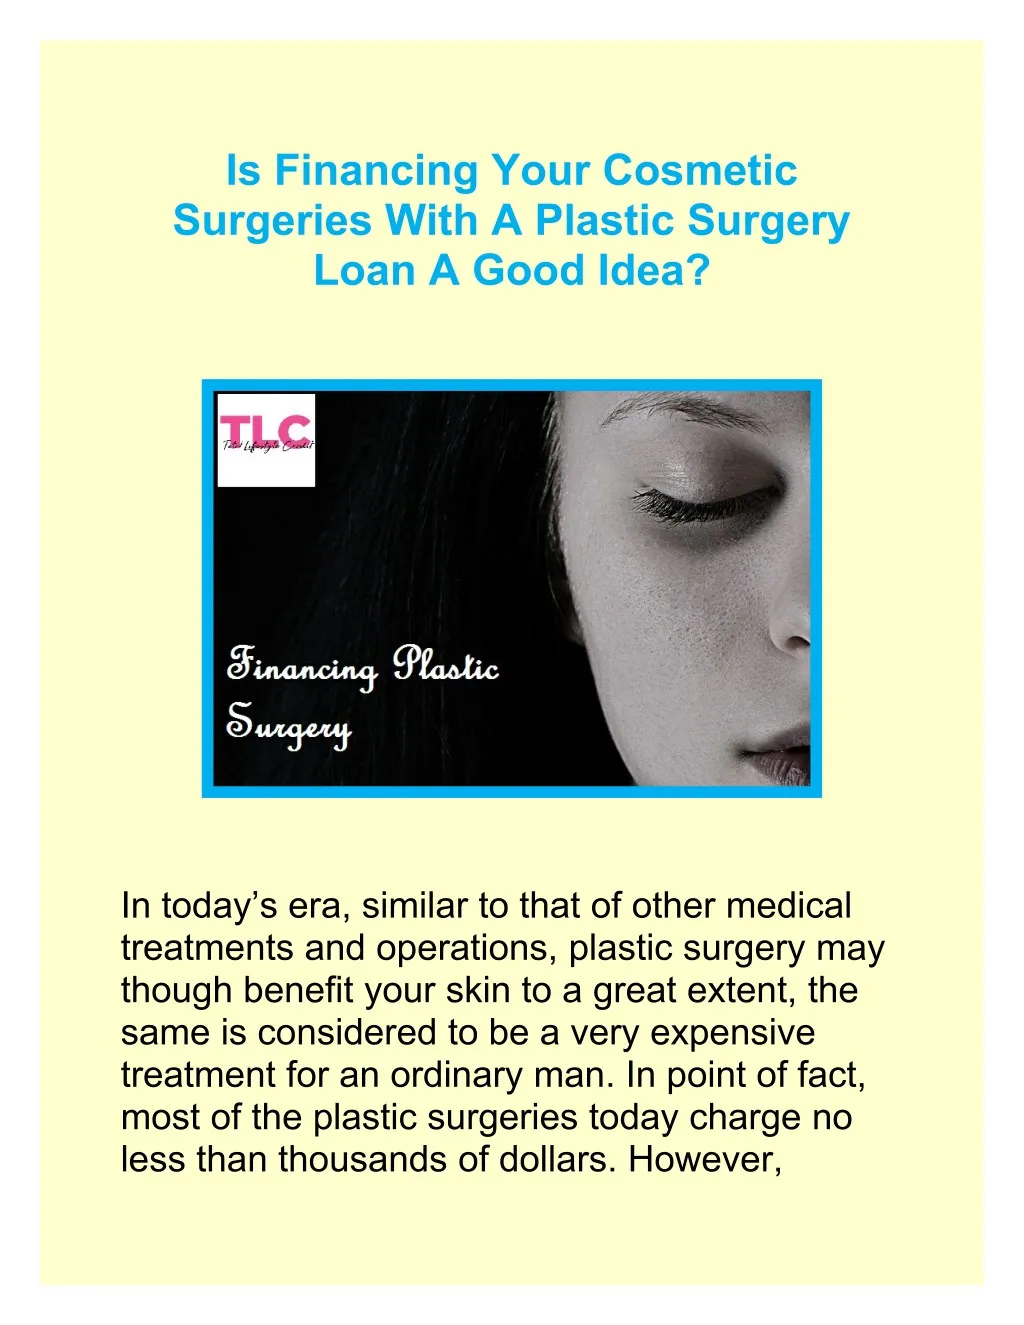 is financing your cosmetic surgeries with